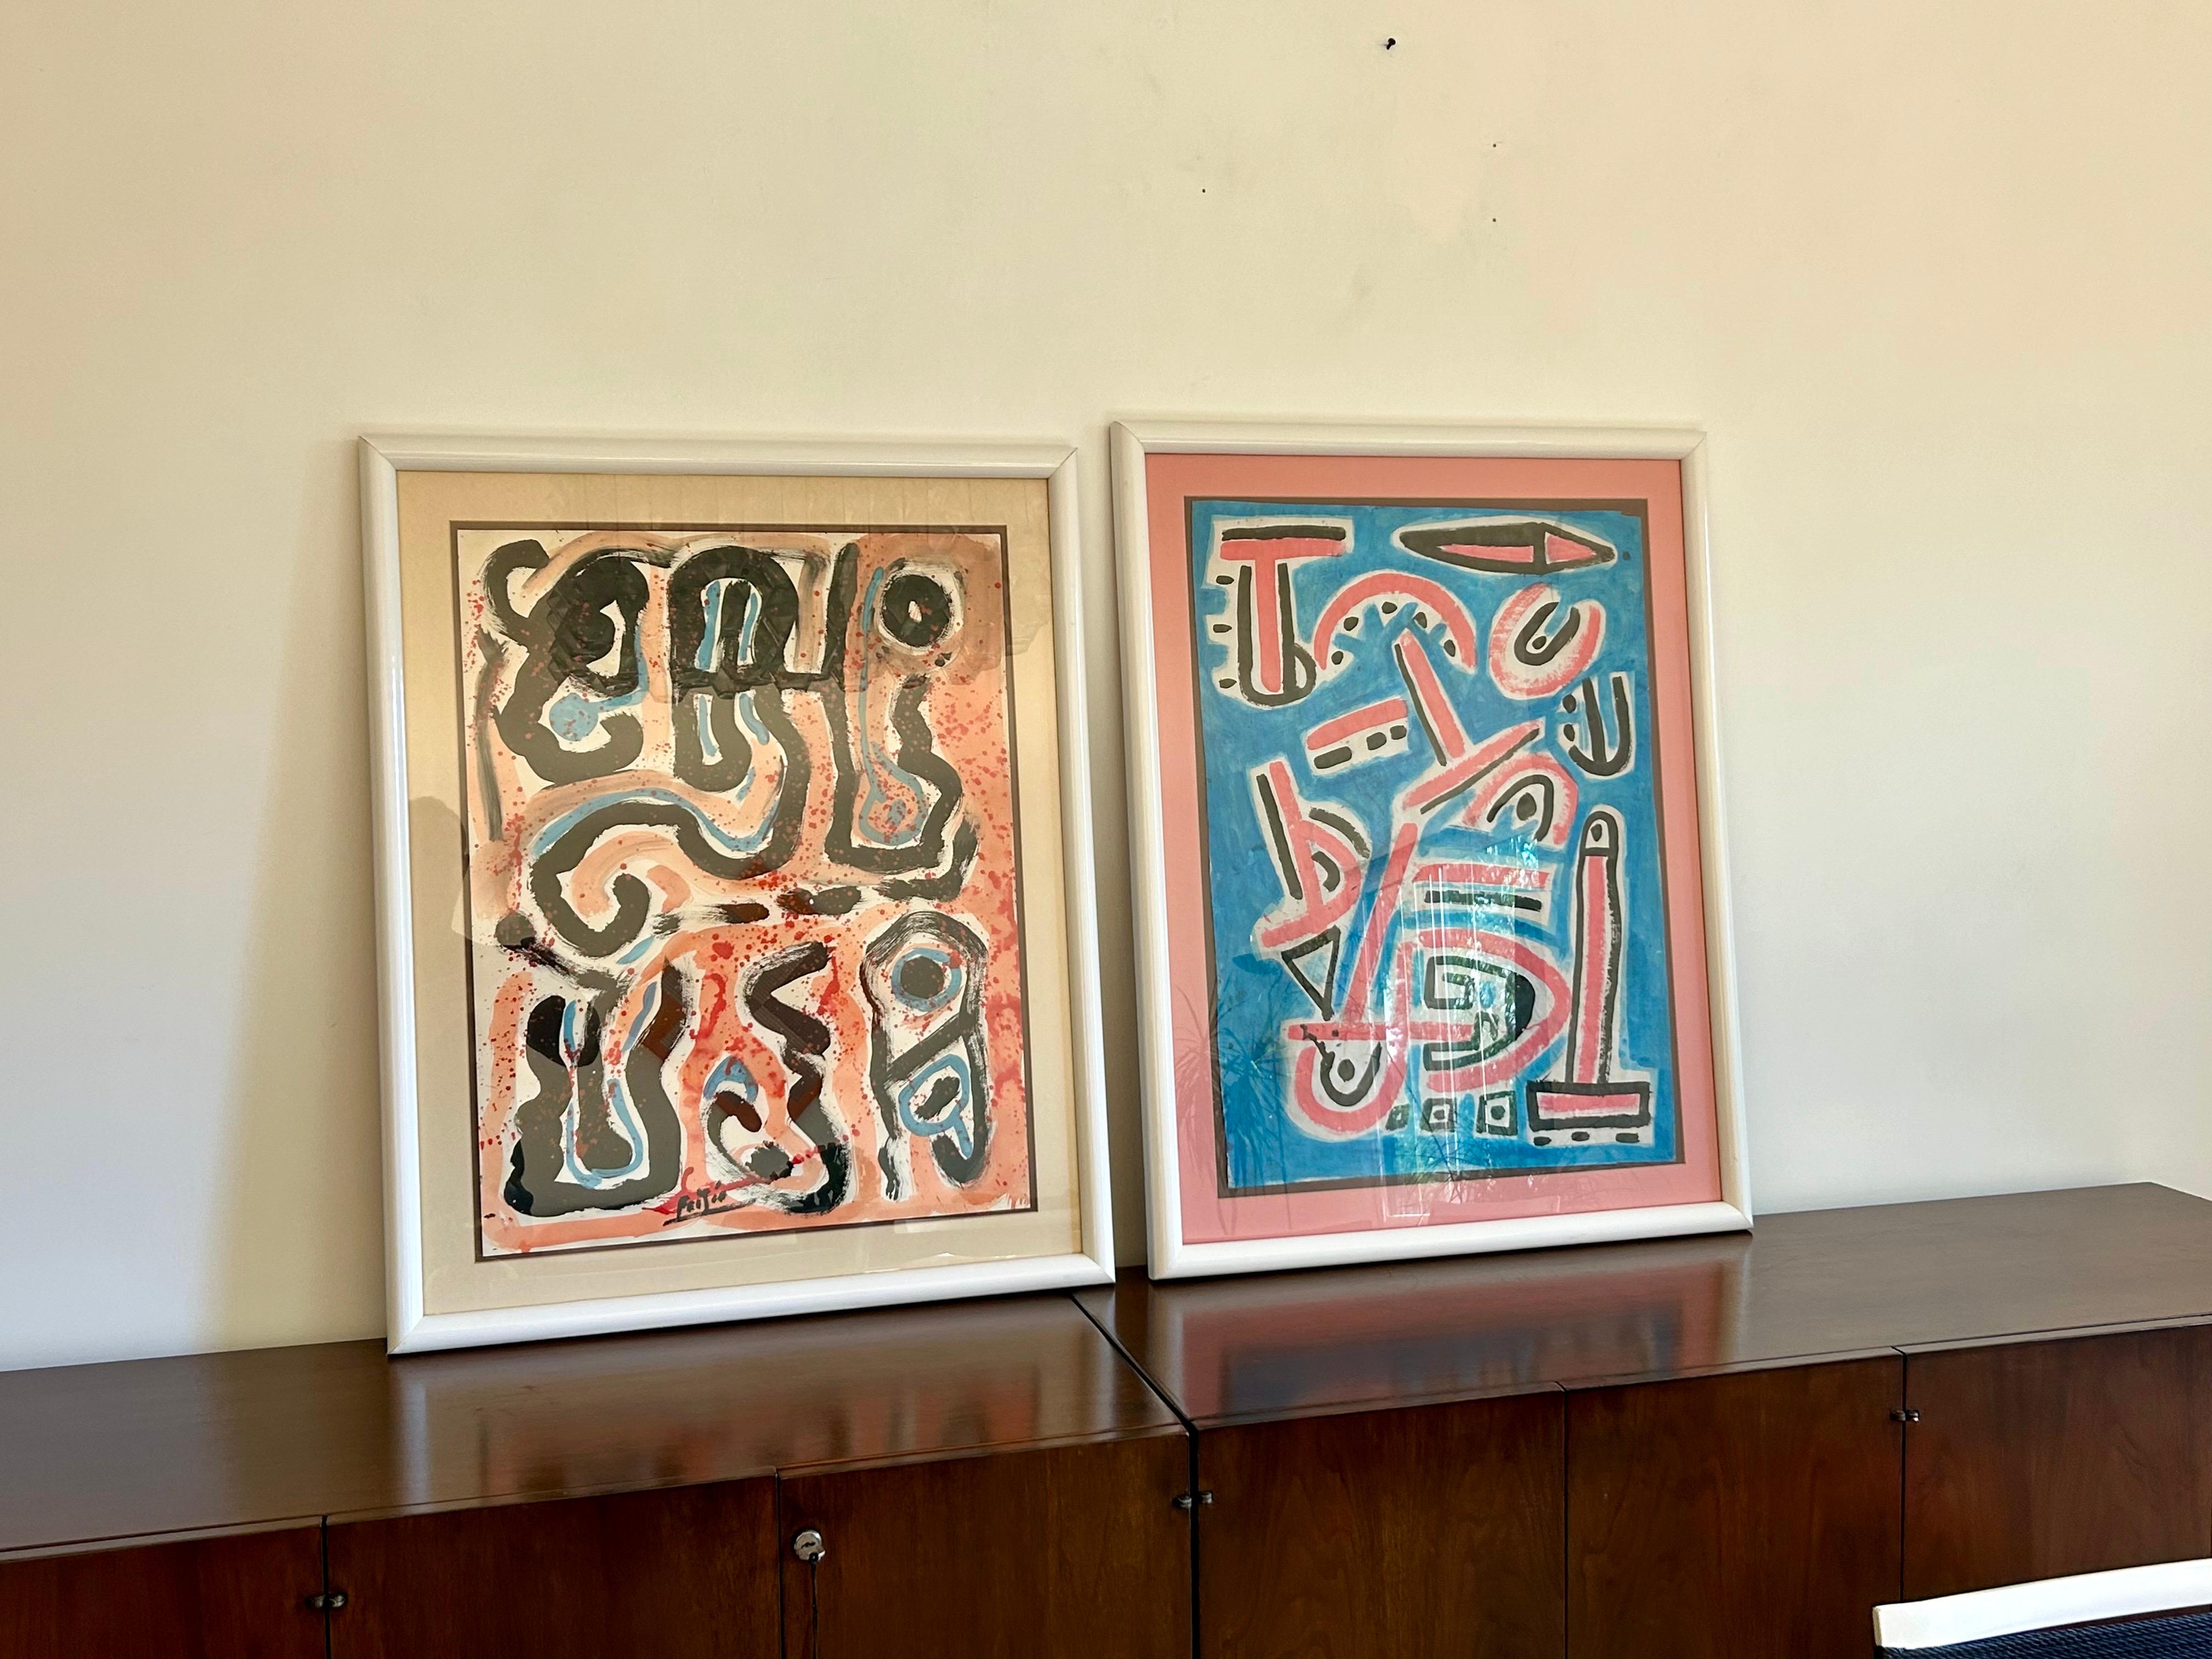 1914 - 1992
Mr. Feijoo was an obscure self taught Cuban artist, author, poet and illustrator.
His art and books are in collections throughout Europe and the USA.
He was friends with notable artists of his time, including Jean Dubuffet whom coined